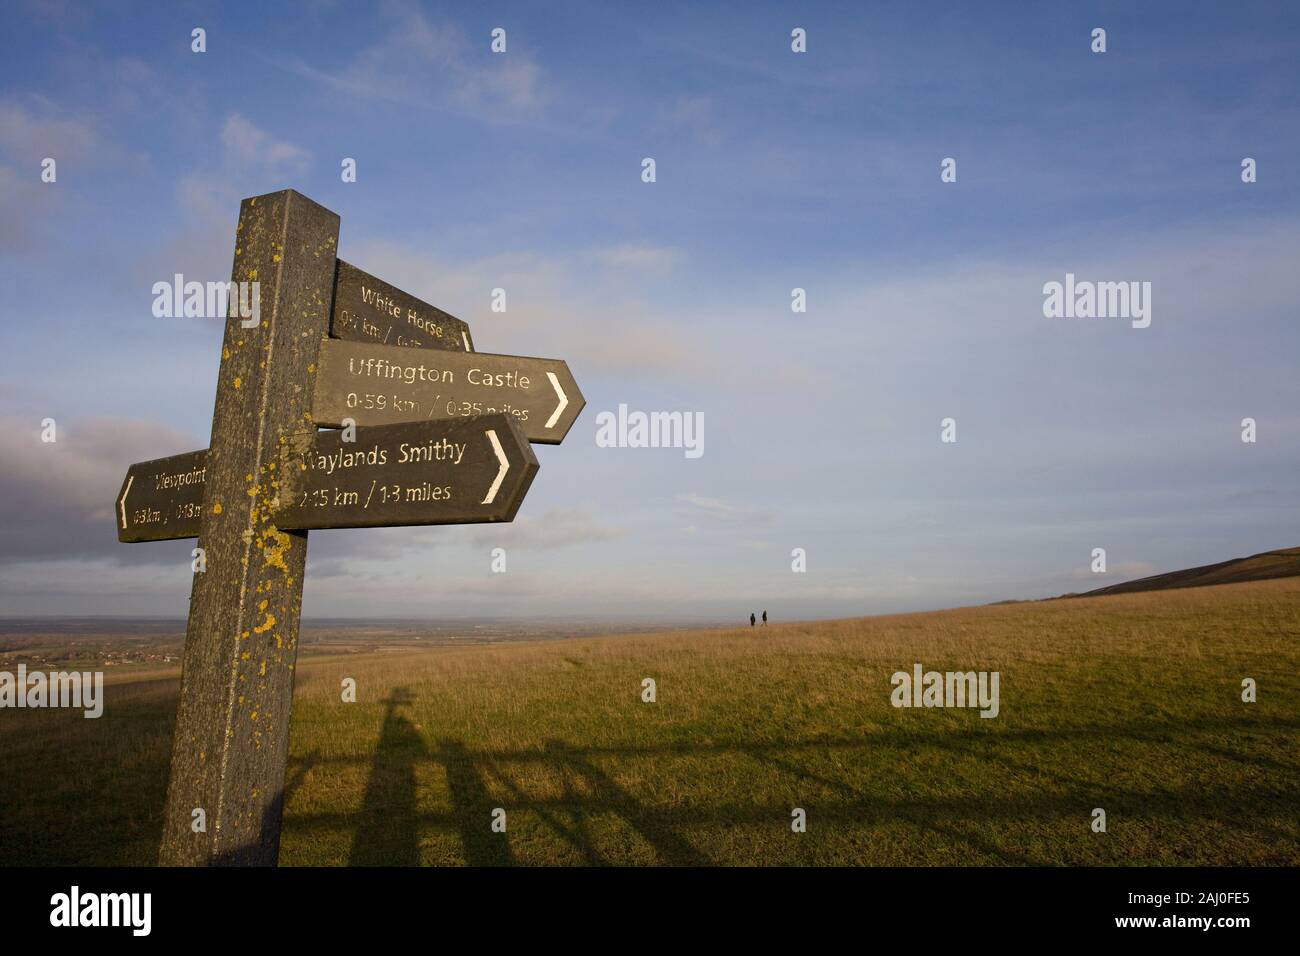 Directions on top of white horse hill, Uffington, England Stock Photo